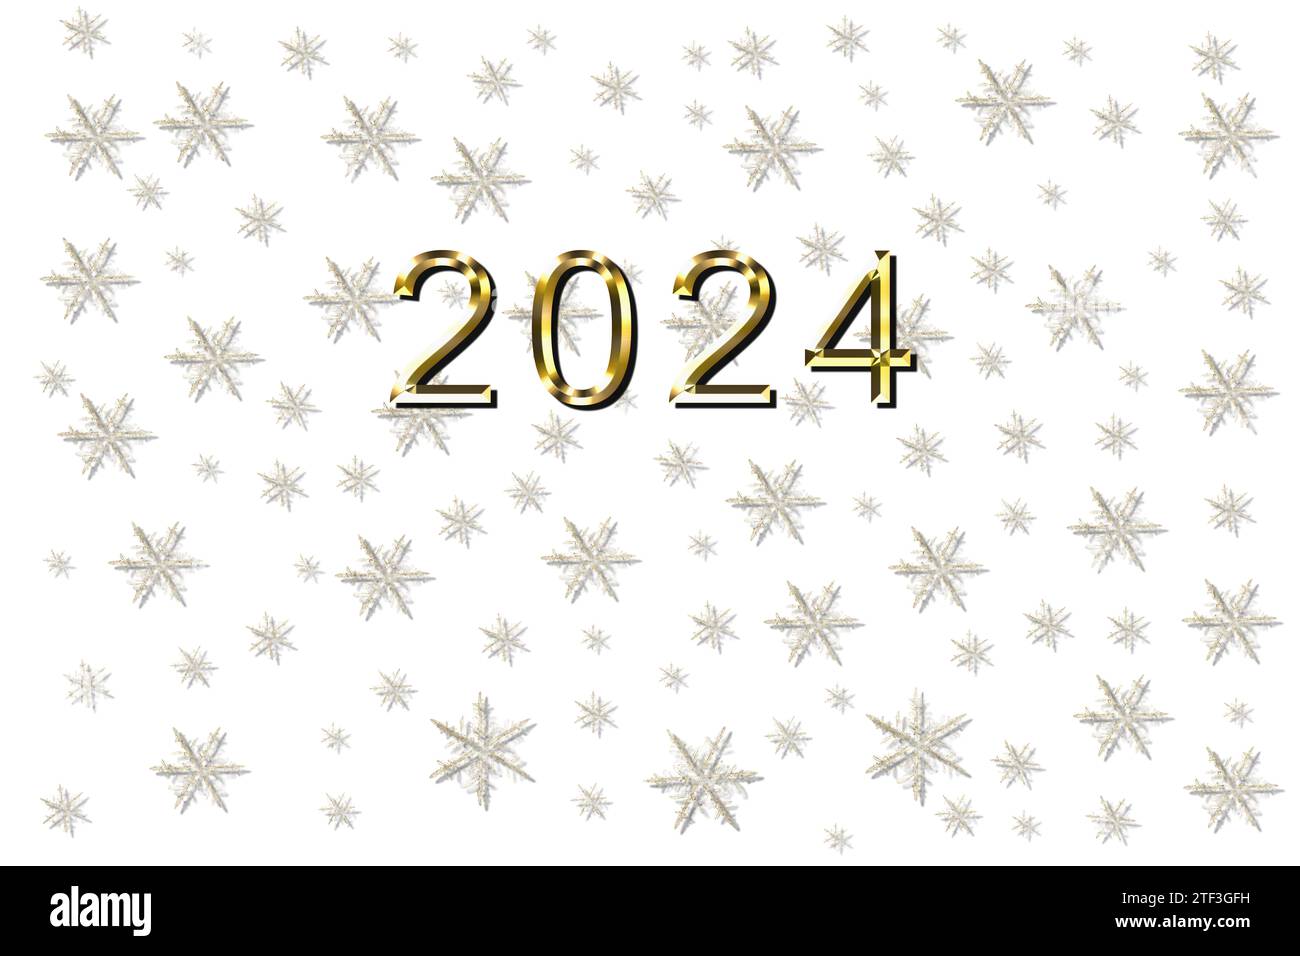 year 2024 golden new year, snowflakes with brilliant prospects with golden inscription, an electrifying Illustration of 2024 Stock Photo